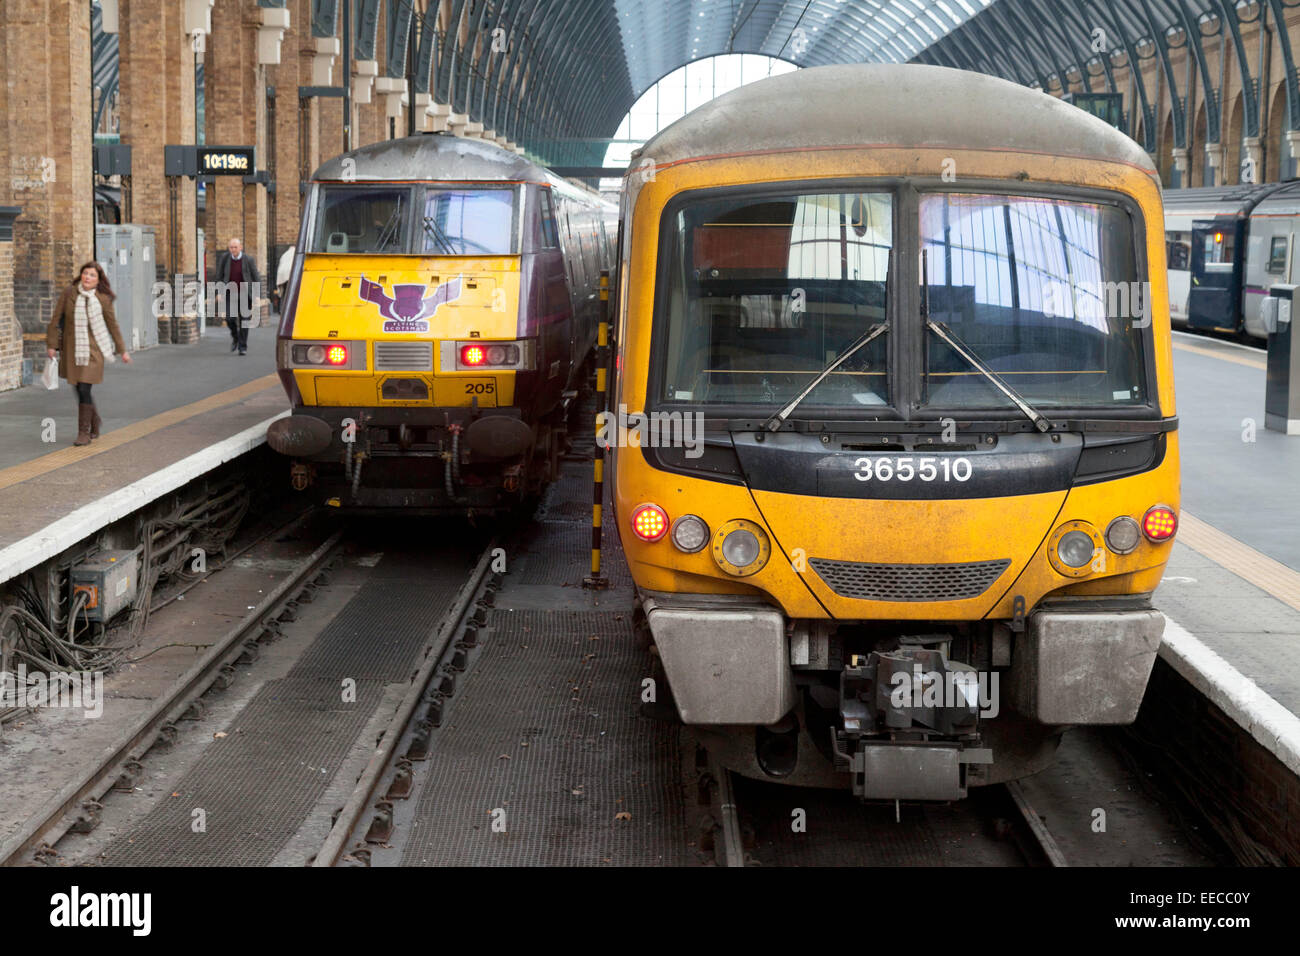 The front of two trains at the platform, Kings Cross Station, London UK Stock Photo